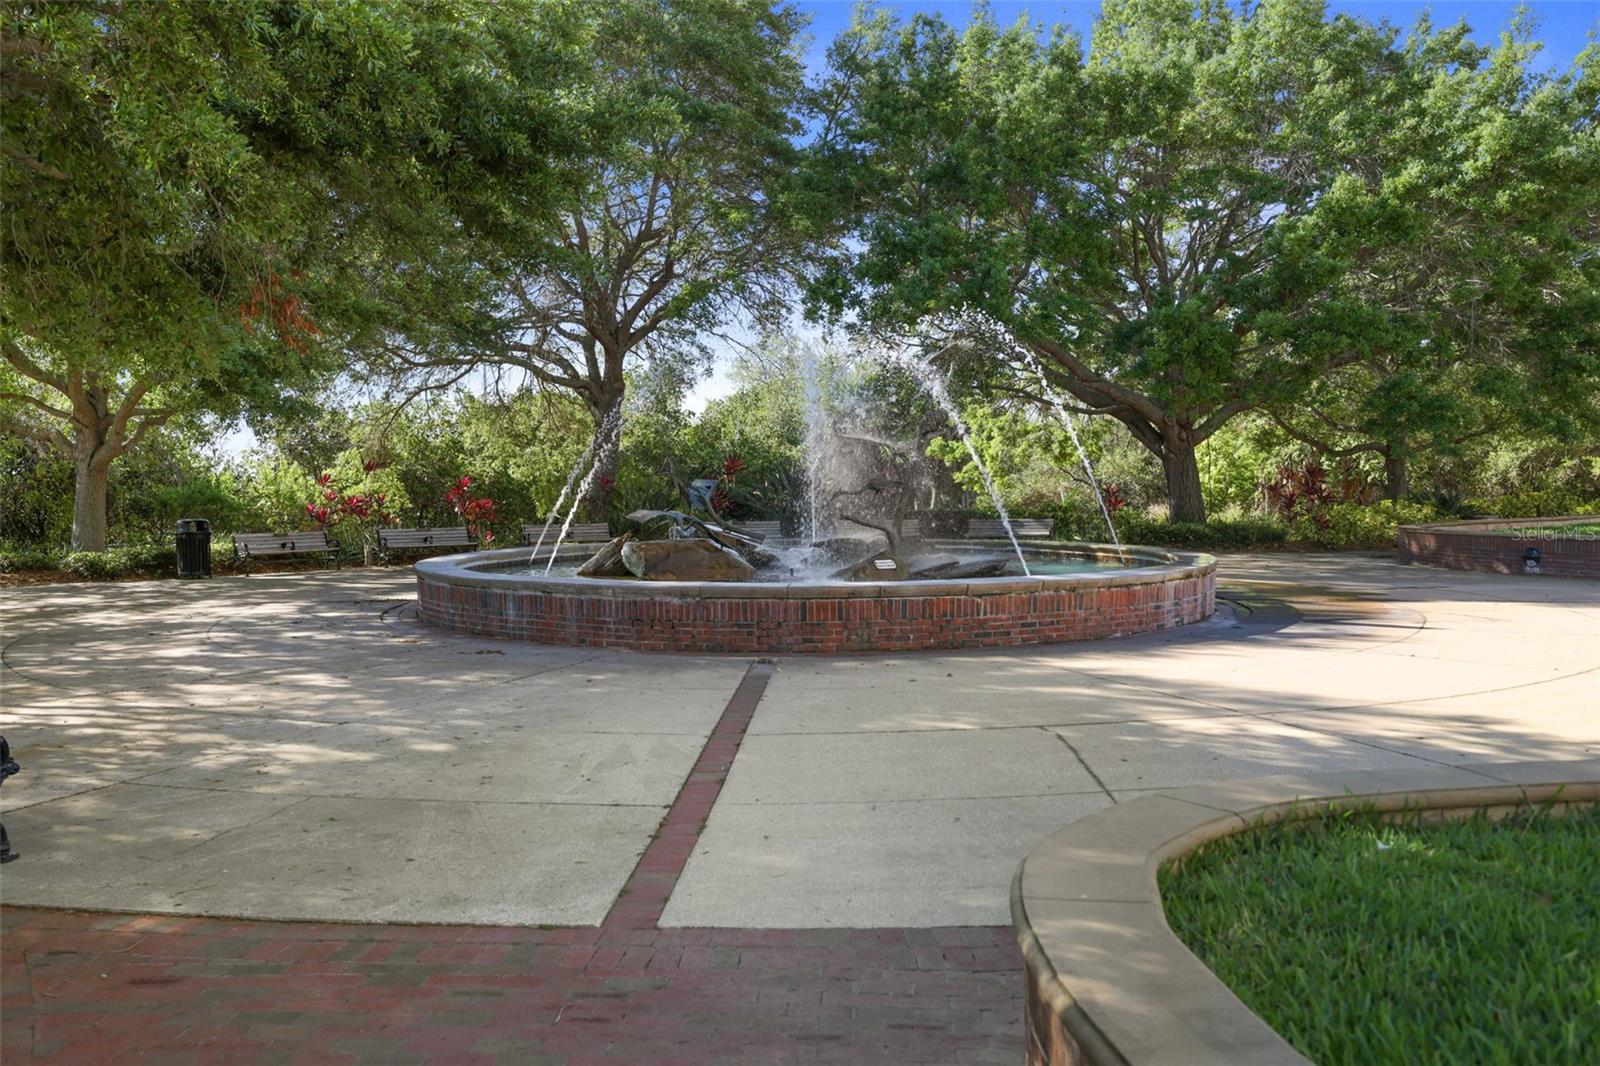 You'll have an aerial view of this charming fountain from your balcony!